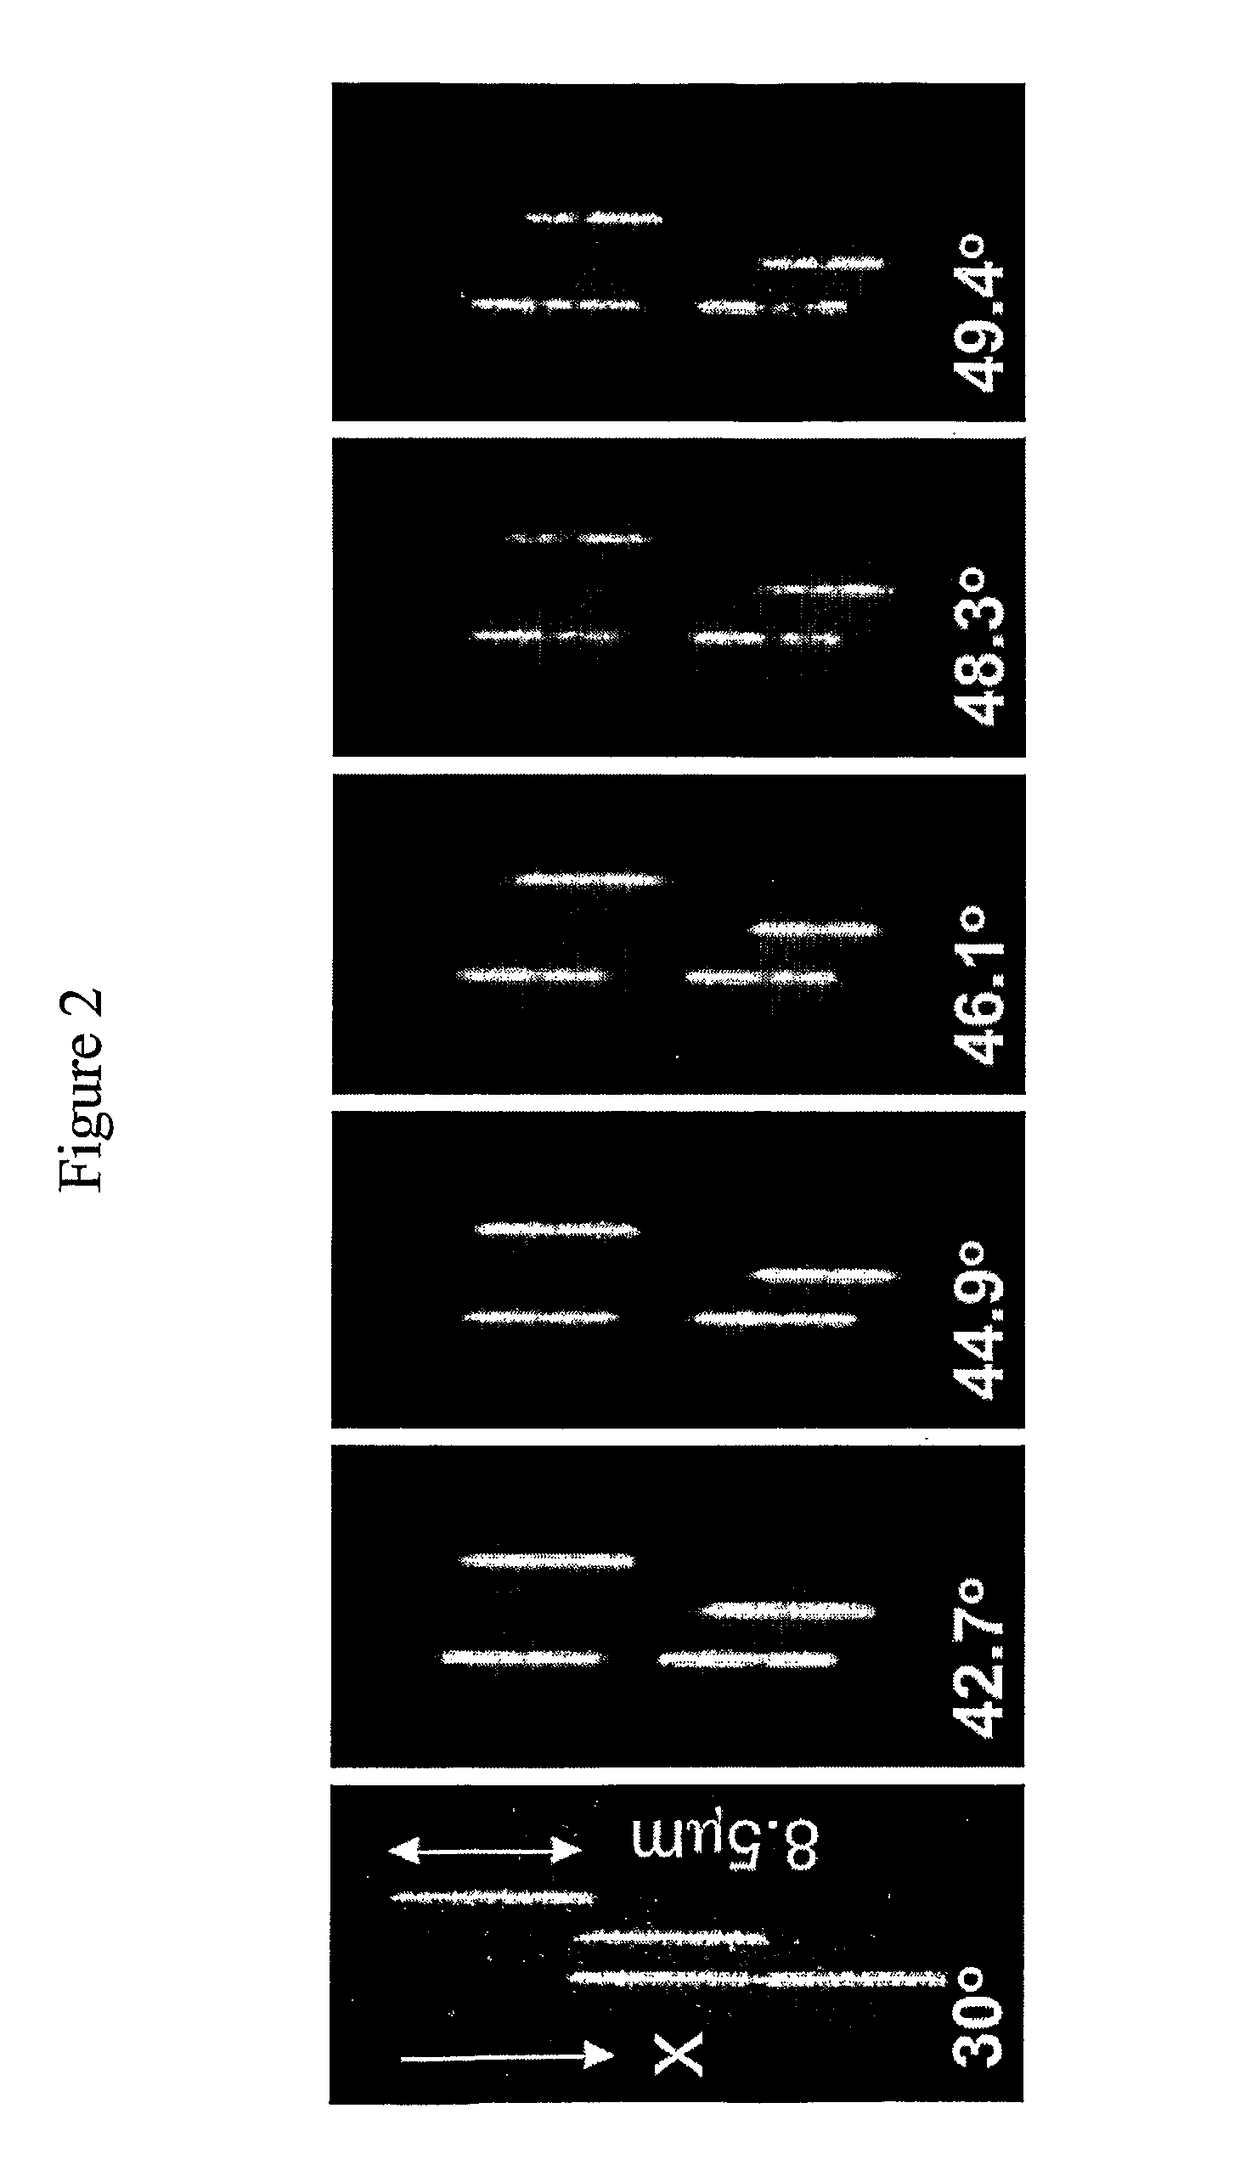 Method for the mapping of the local AT/GC ratio along DNA